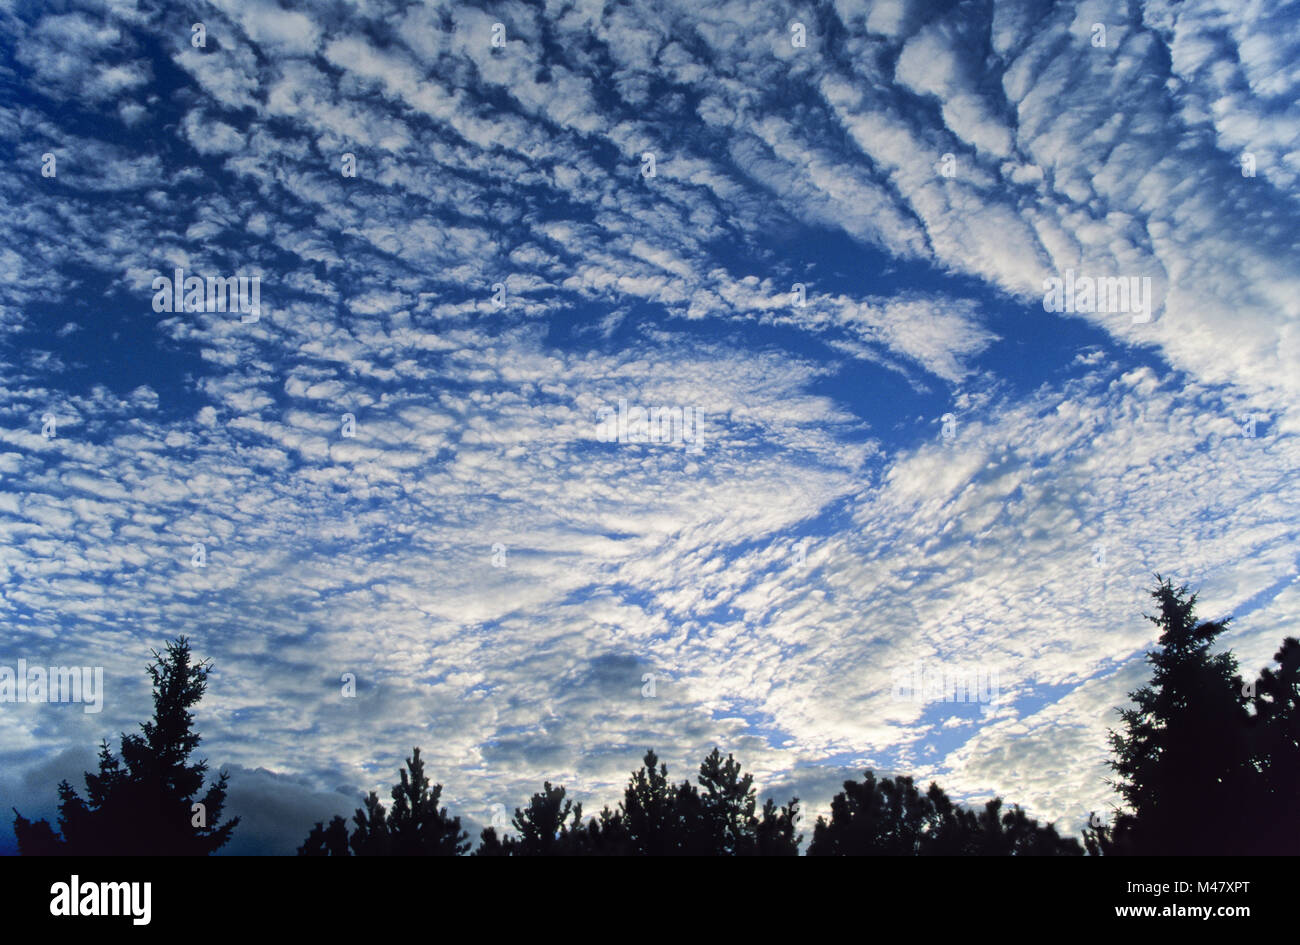 Cloud formation on the blue sky / Syddanmark Stock Photo